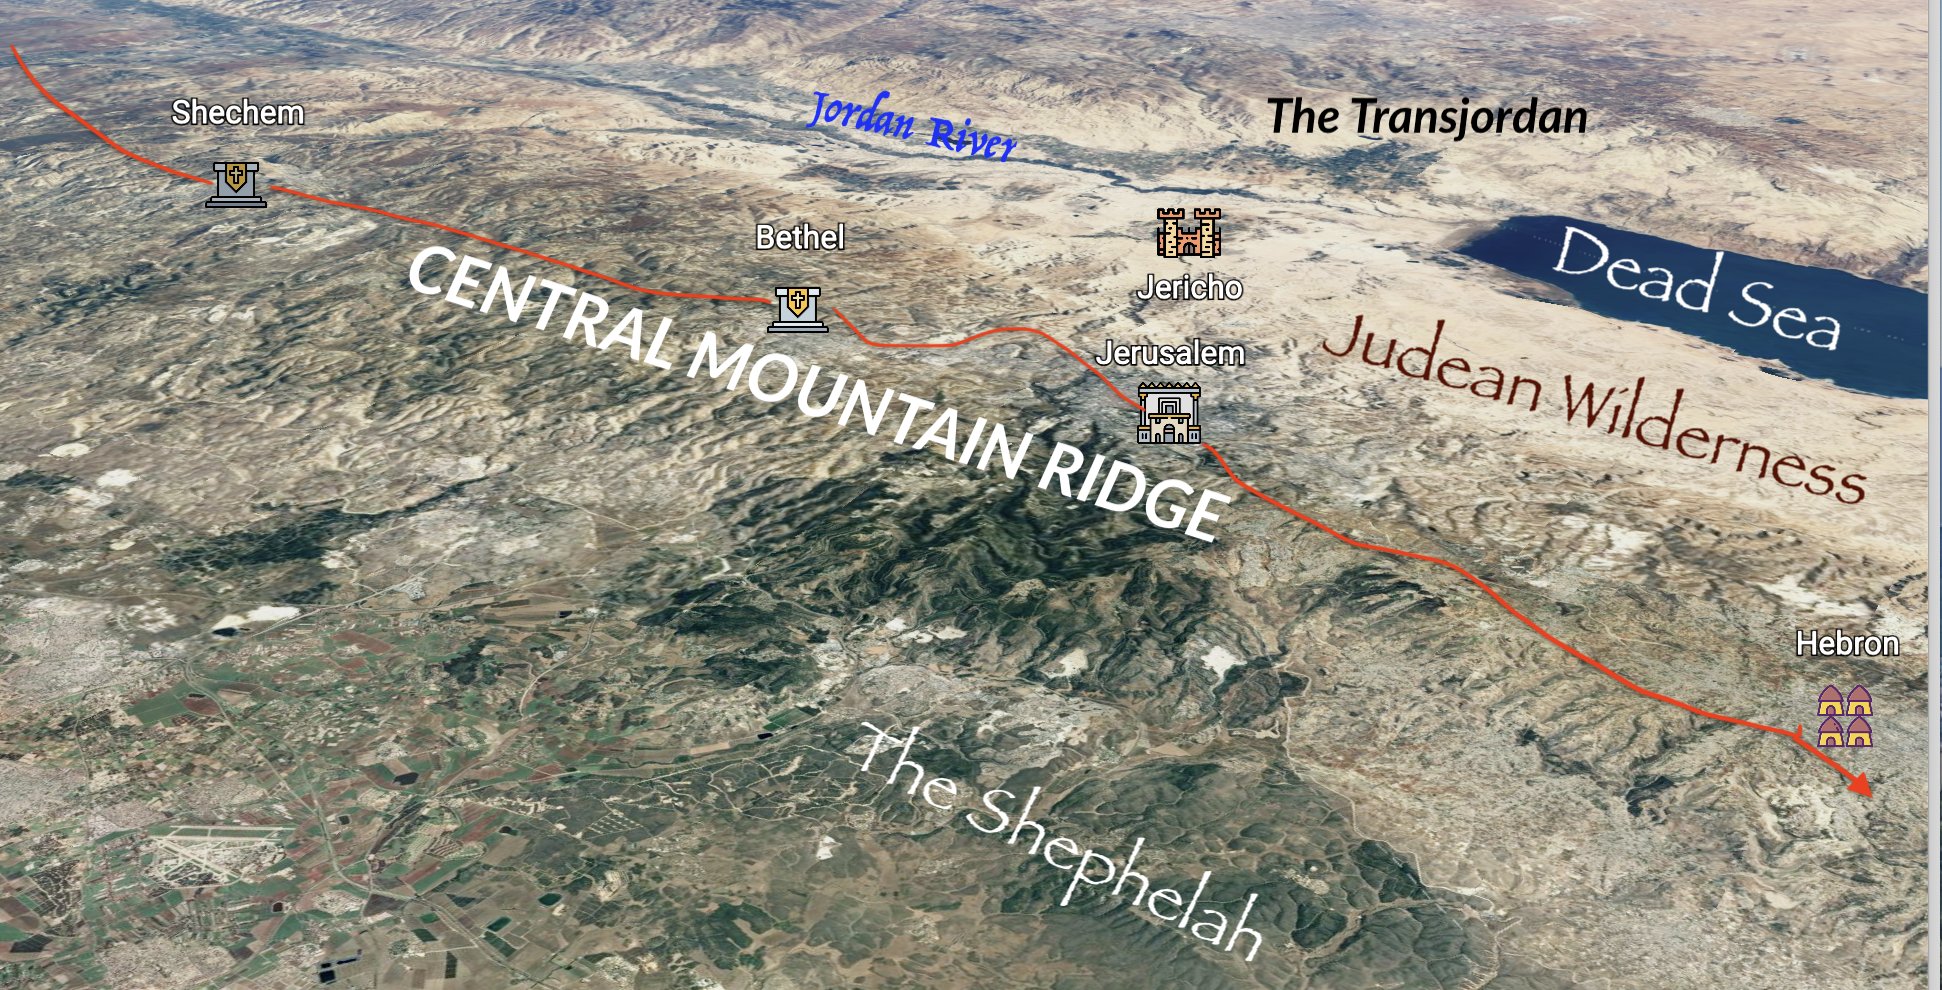 Bethel sat astride the Central Mountain Ridge with Schechem to the north, and Jerusalem to the south.